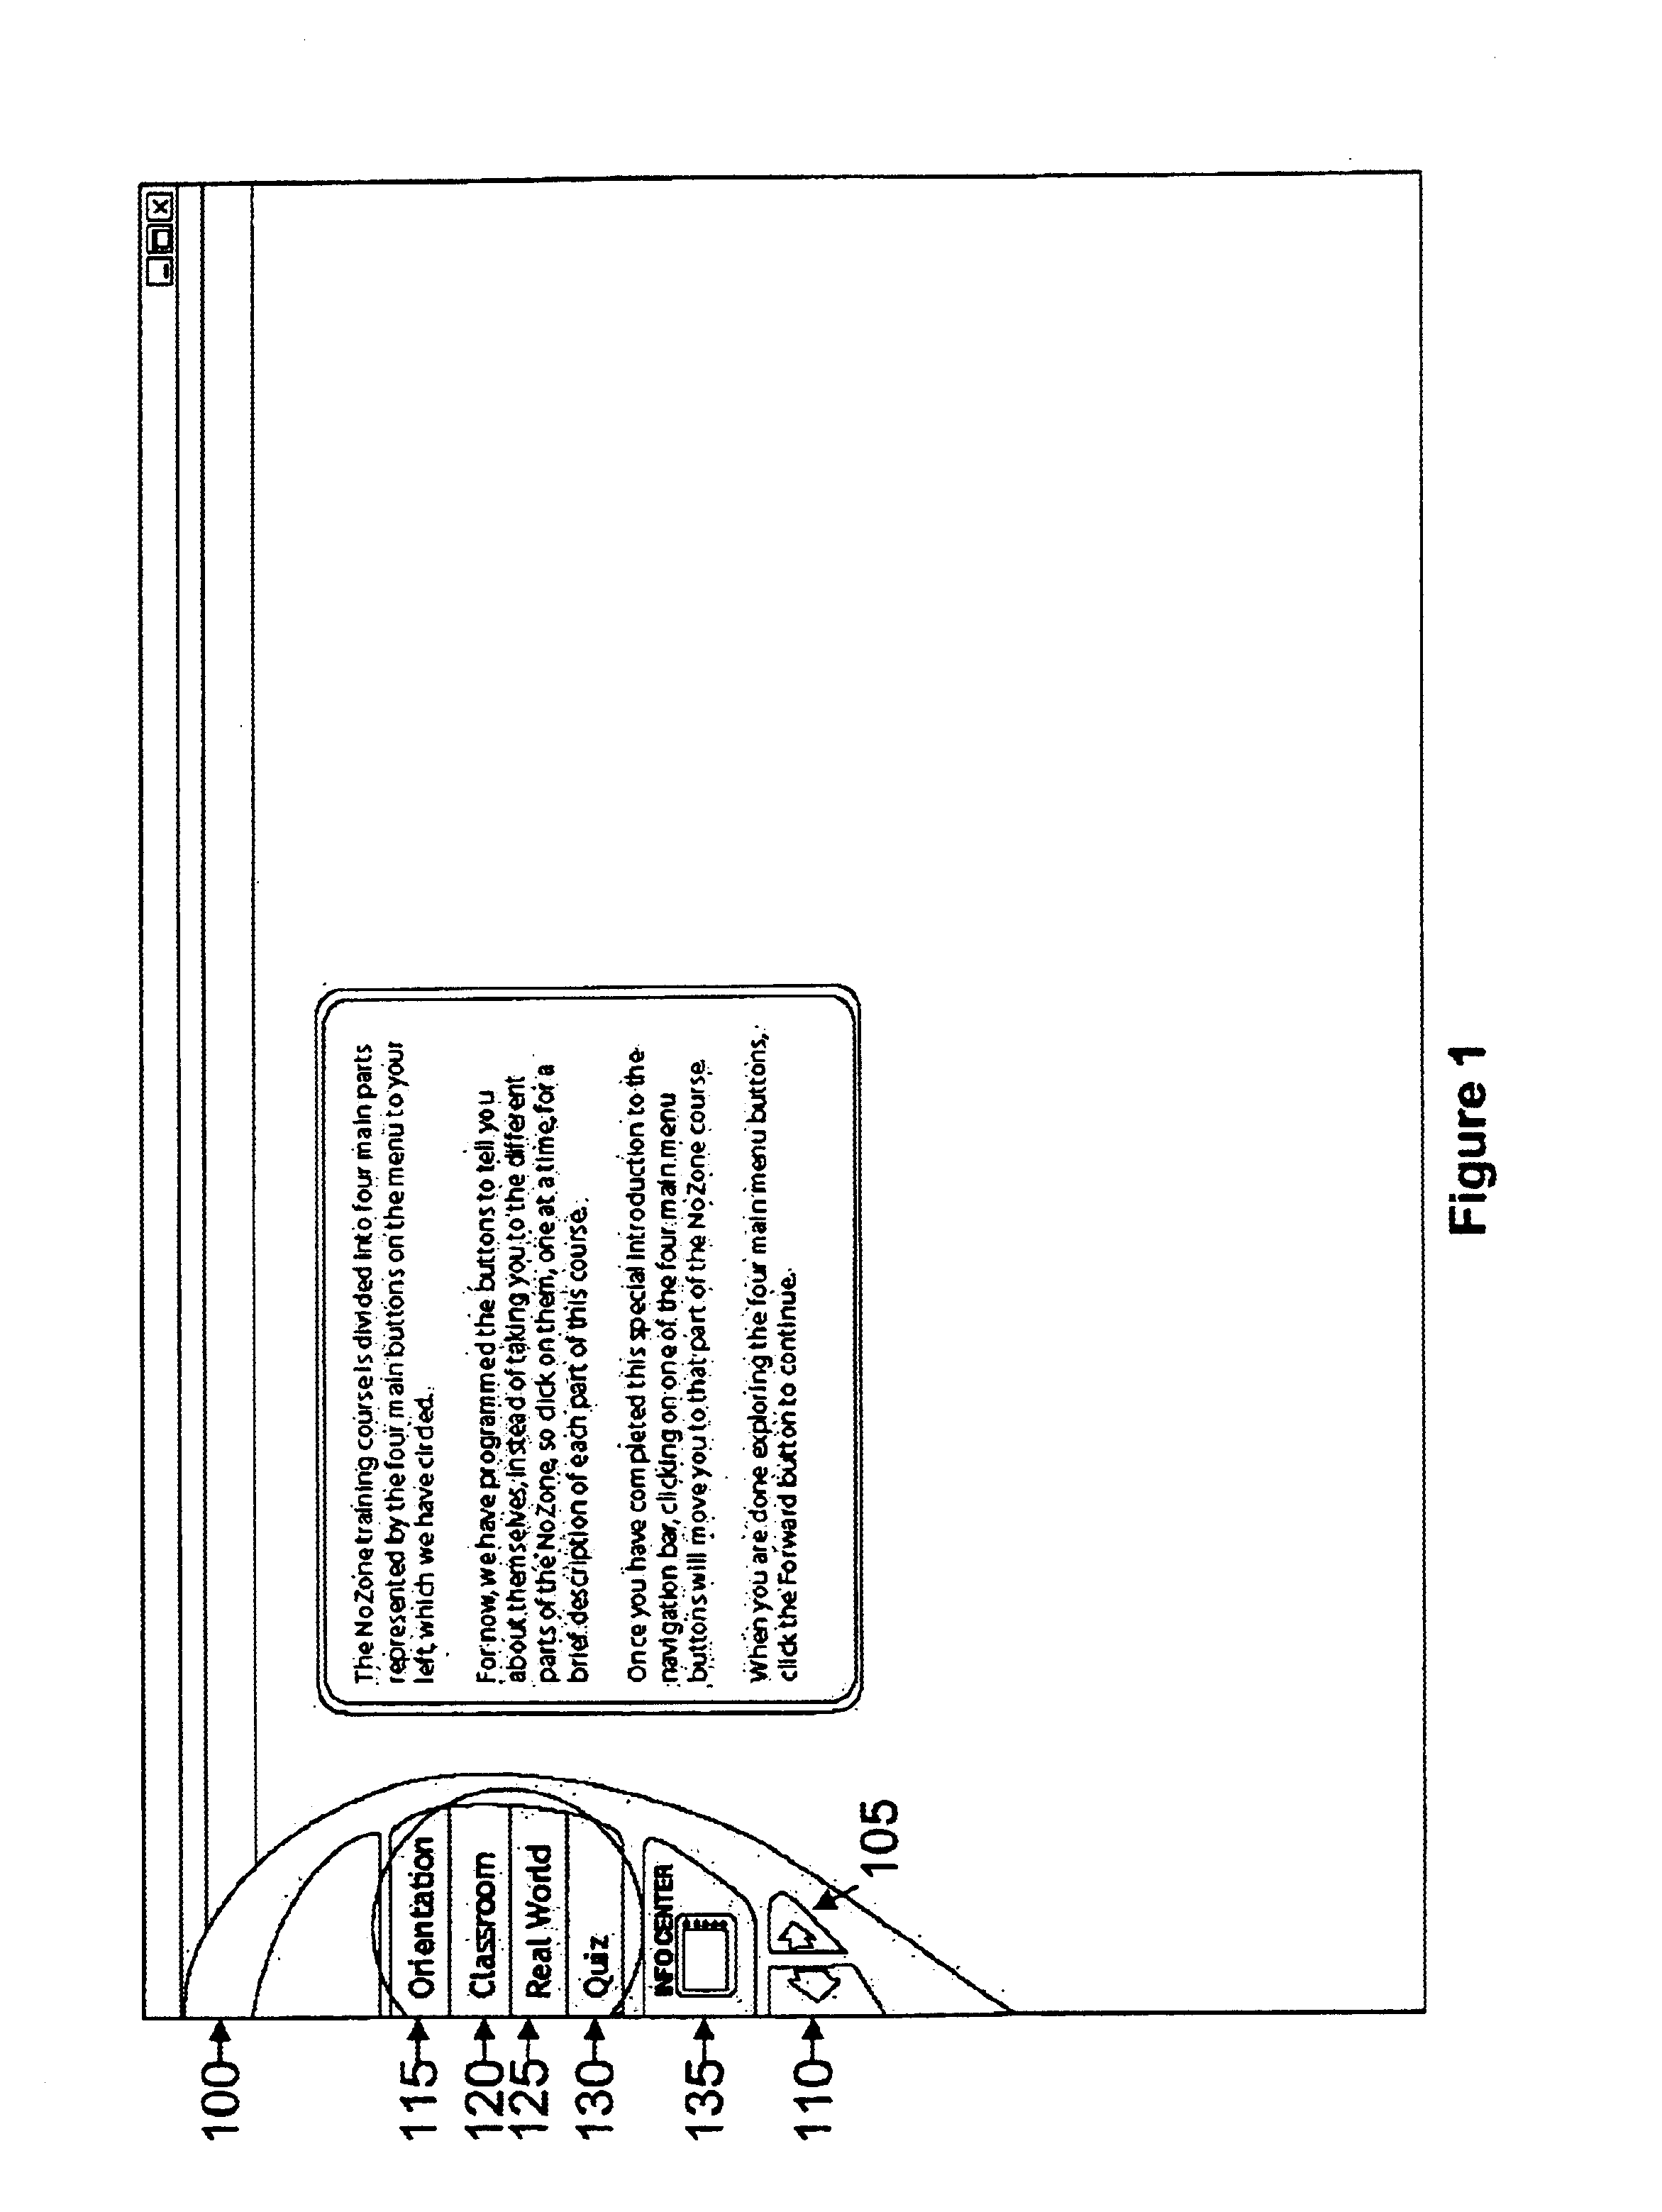 Method for providing business conduct training